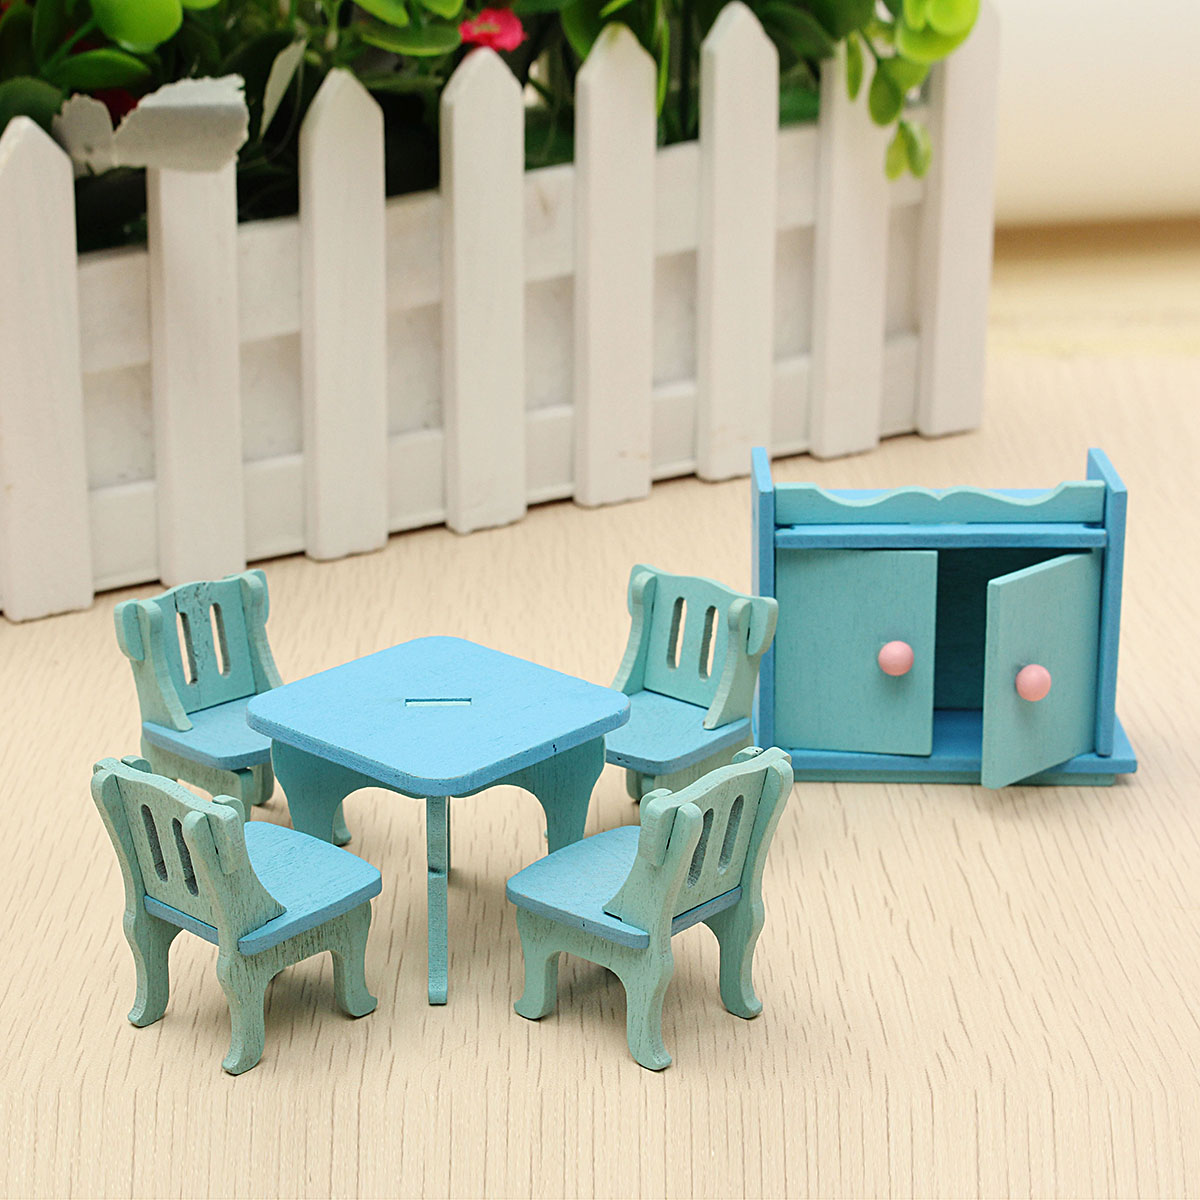 

Wooden Dollhouse Furniture Doll House Miniature Dinning Room Set Kids Role Play Toy Kit